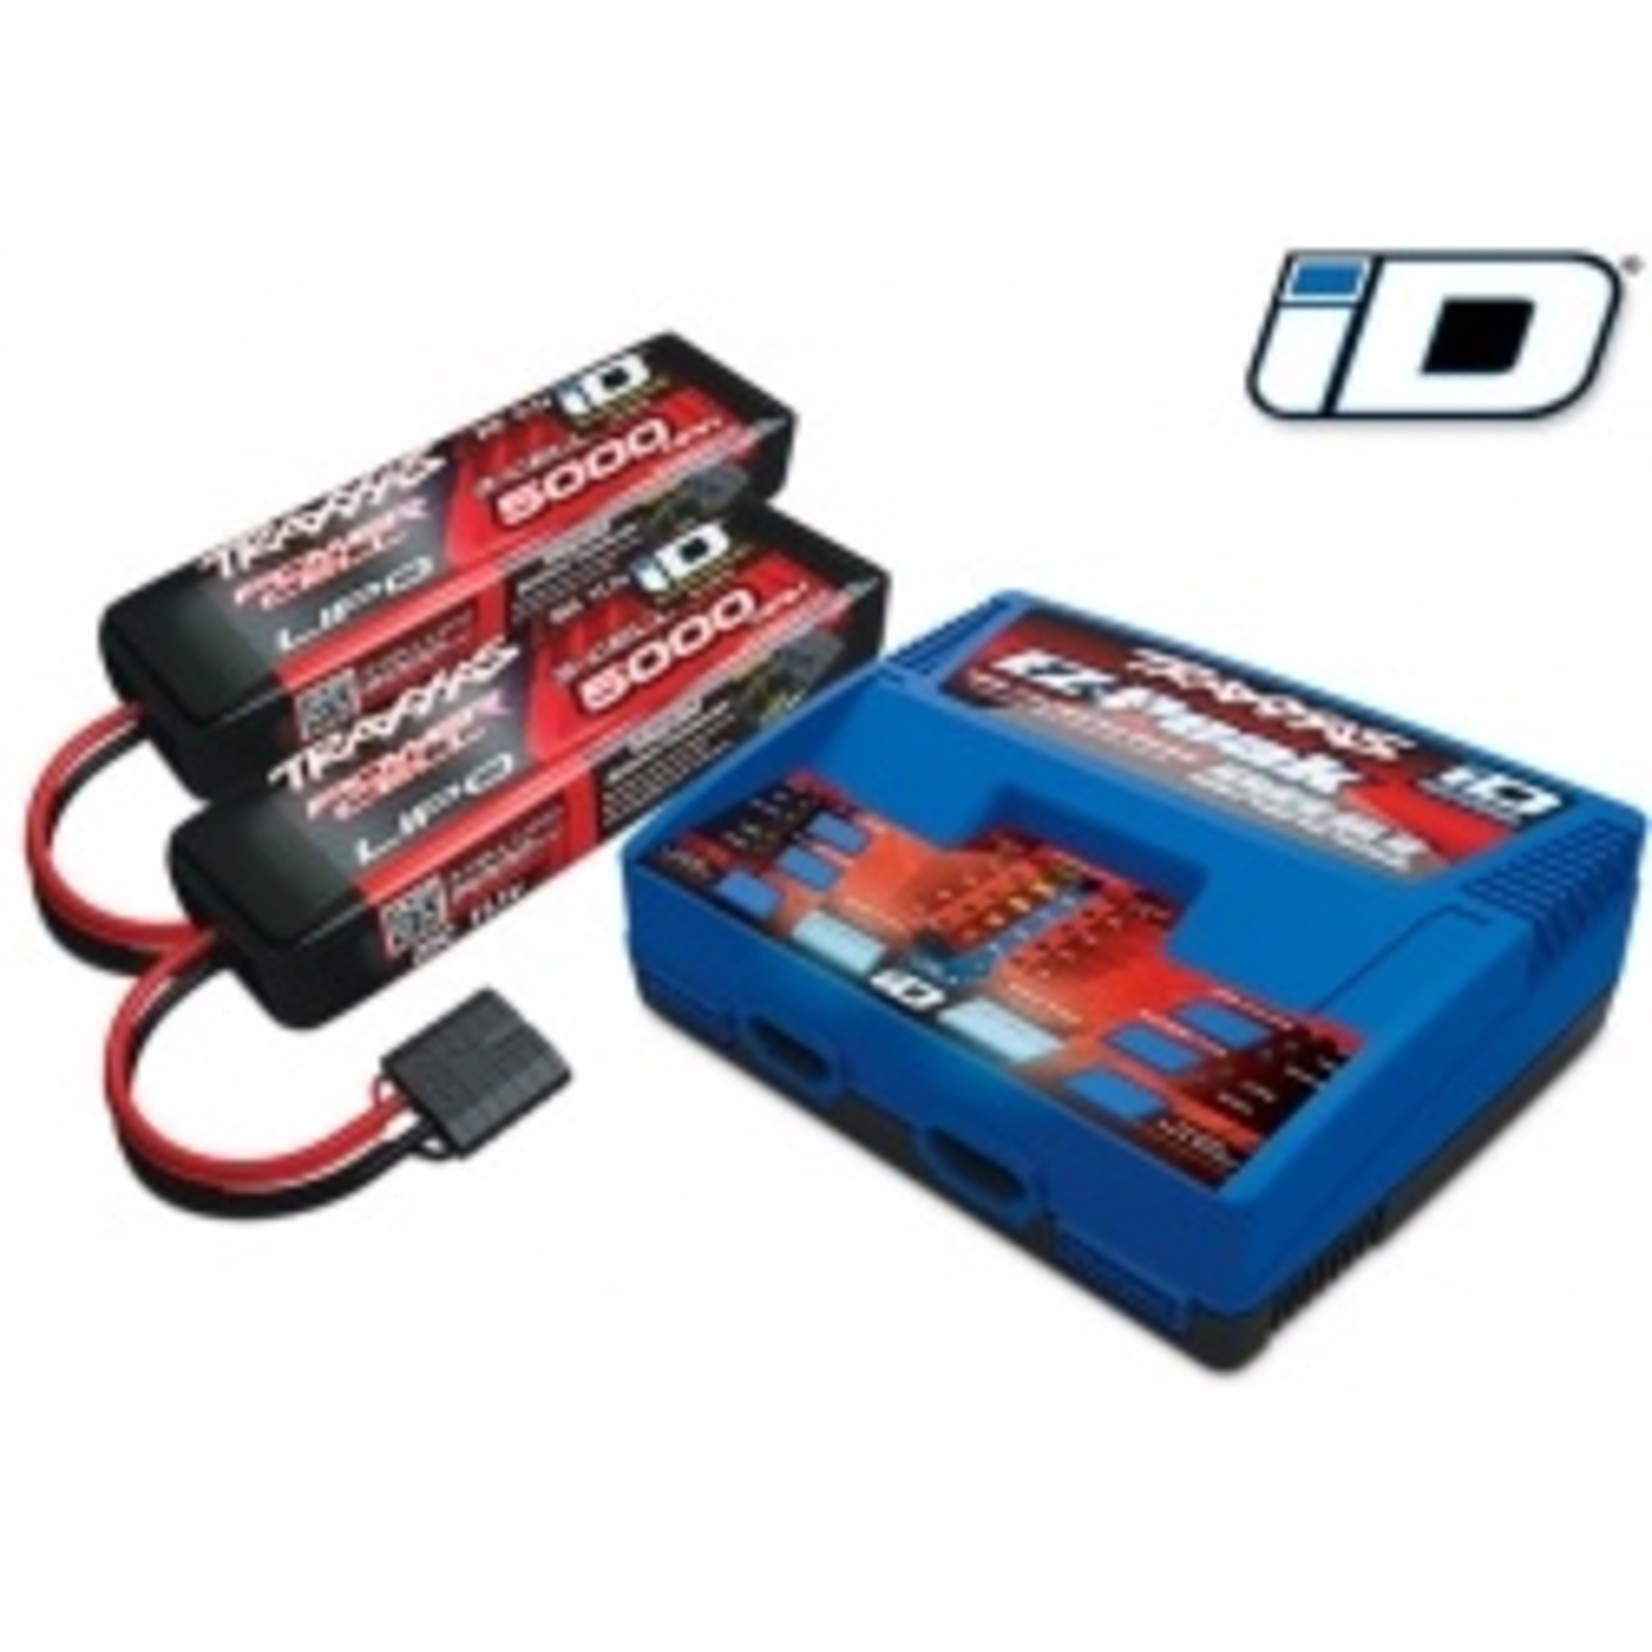 Traxxas Battery/charger completer pack (includes #2972 Dual iD® charger (1), #2872X 5000mAh 11.1V 3-cell 25C LiPo iD® battery (2))